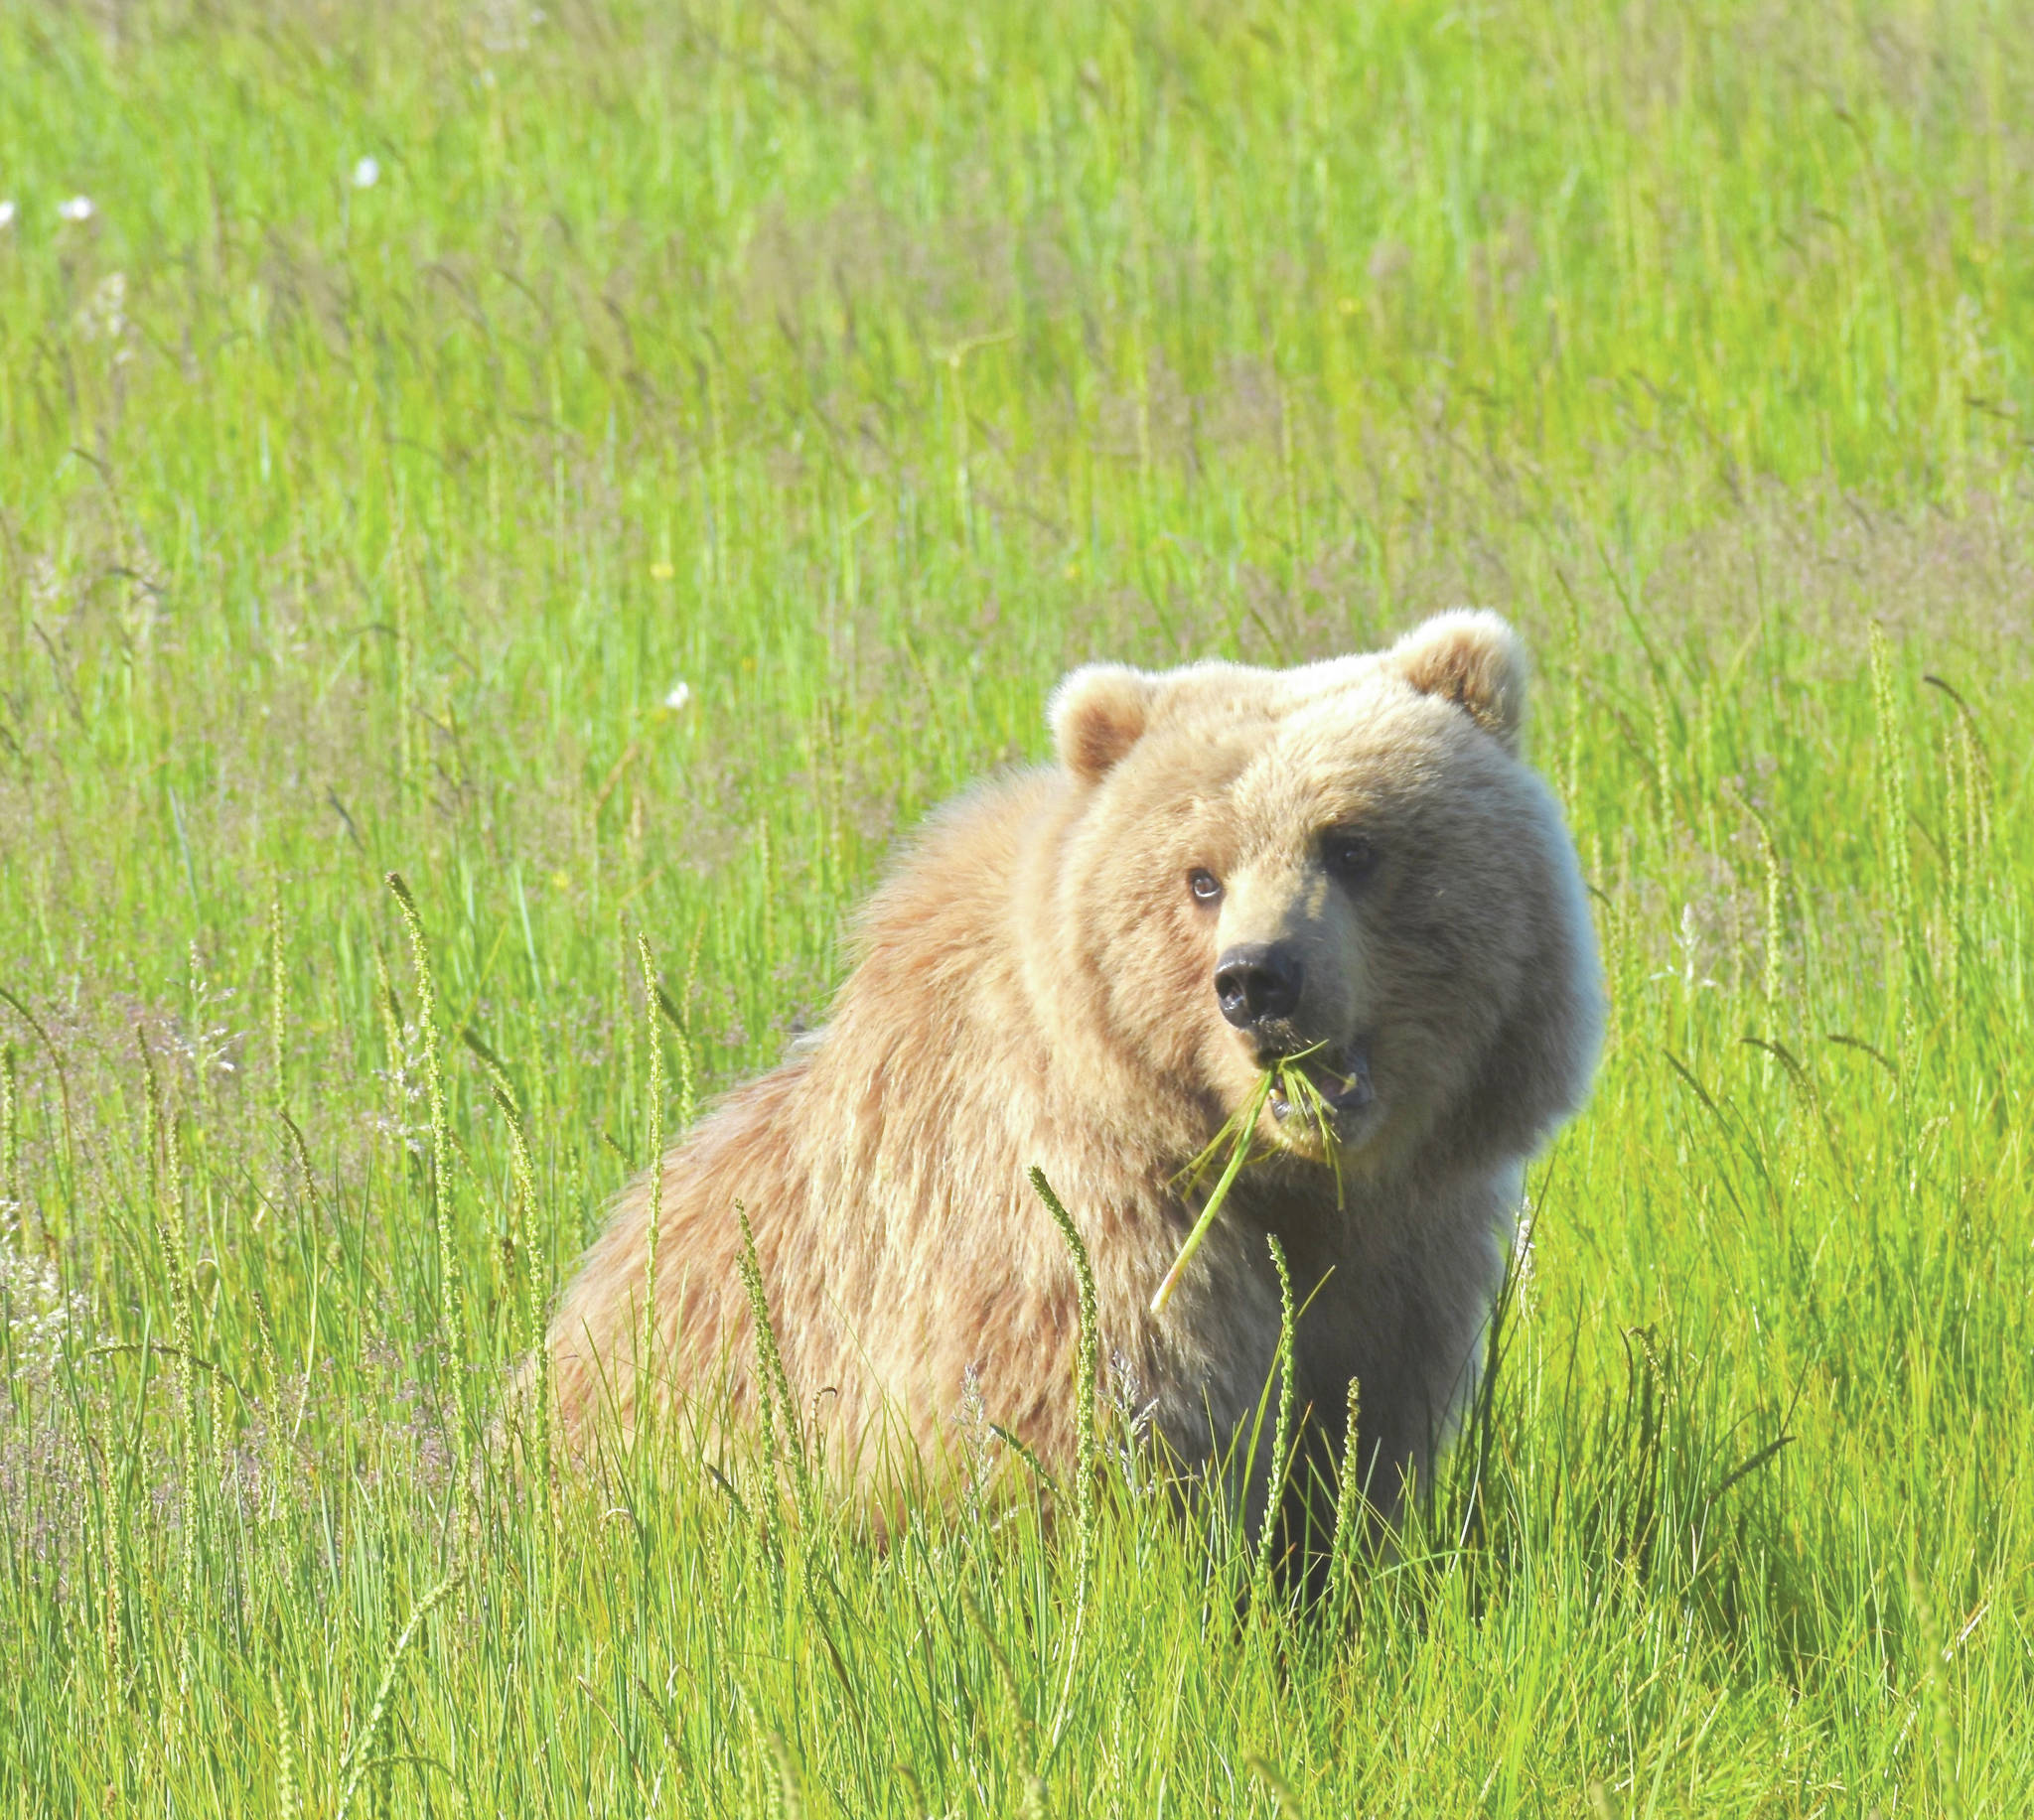 Salt marshes are important food sources for brown bears. As we see an earlier start to the growing season or increased plant growth, bears will likely benefit from them even more. (Photo by Michael Hannam/NPS)